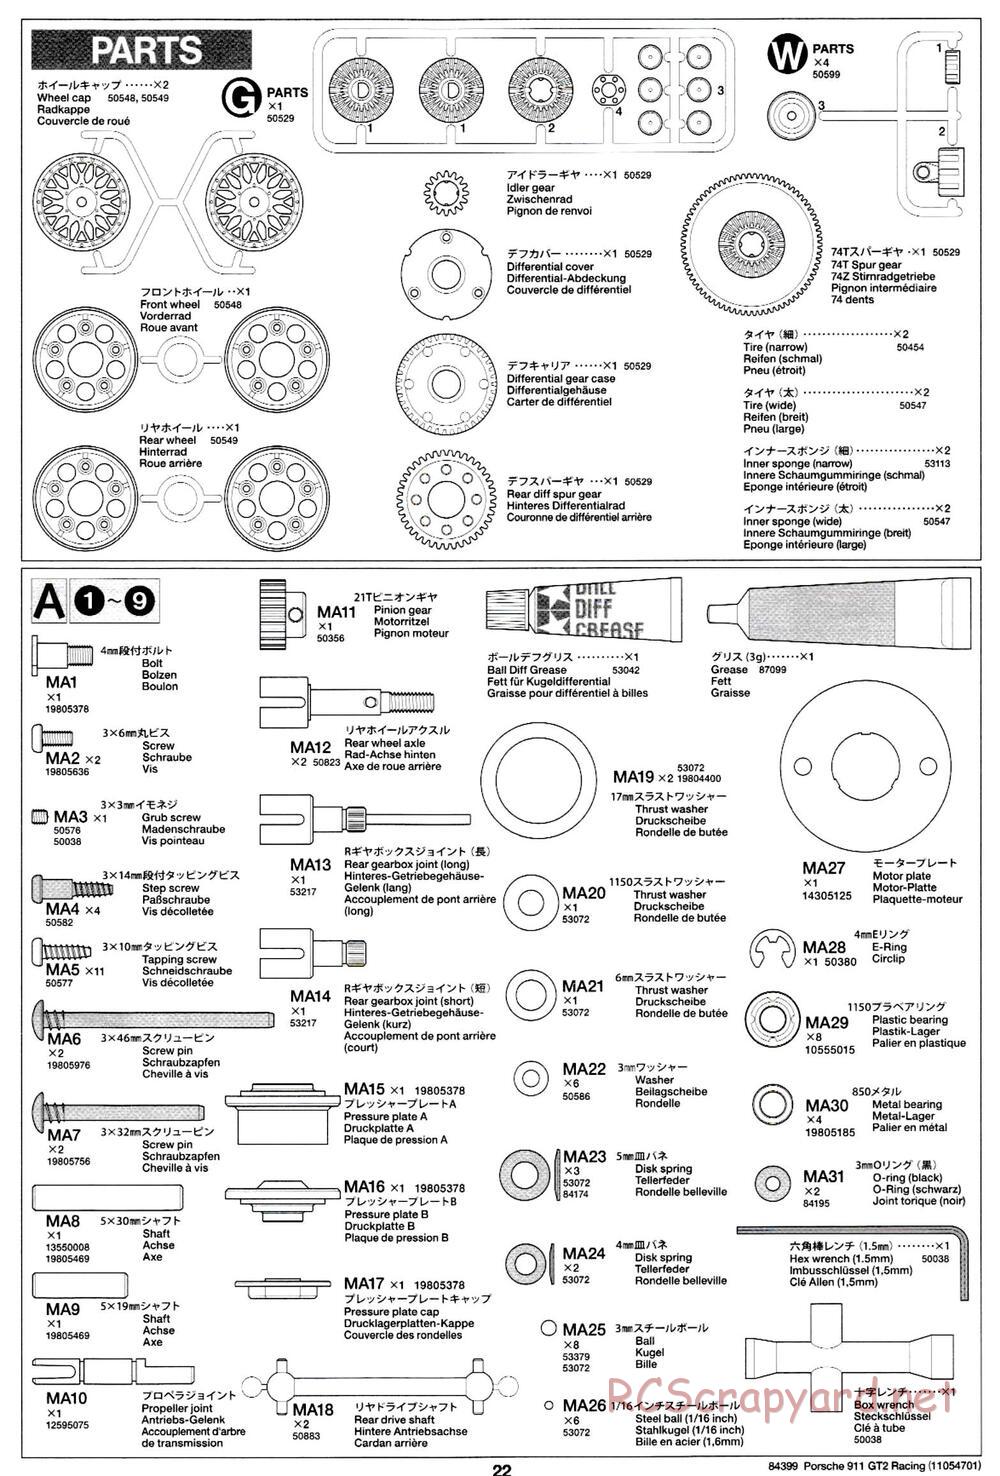 Tamiya - Porsche 911 GT2 Racing - TA-02SW Chassis - Manual - Page 22